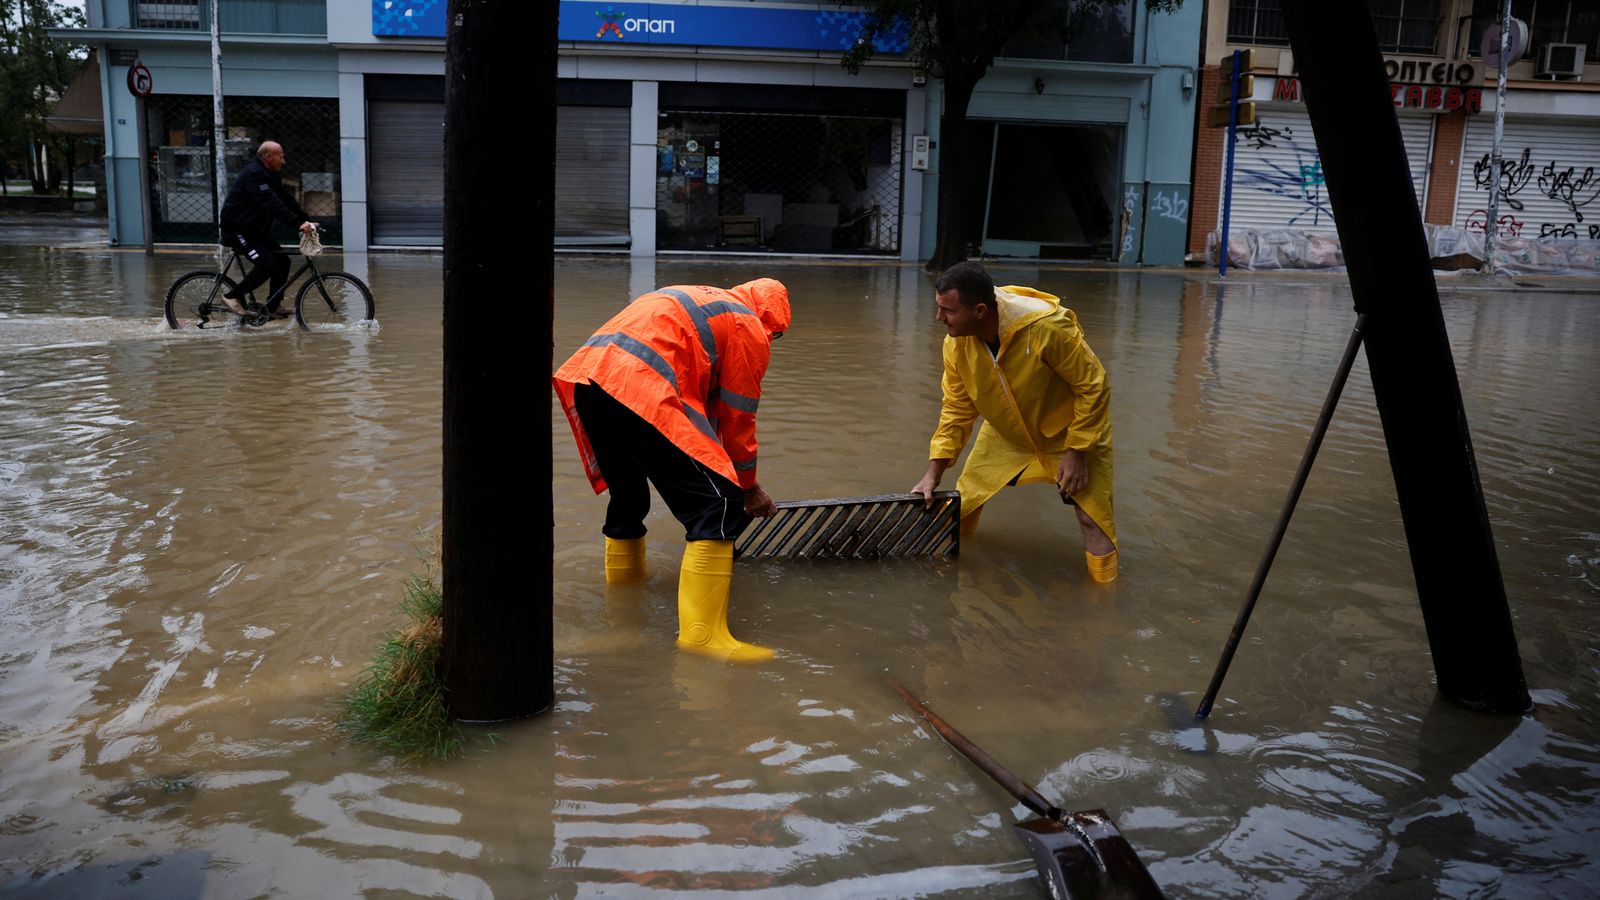 Homes and roads damaged by flooding in Greece just weeks after deadly storms battered the country